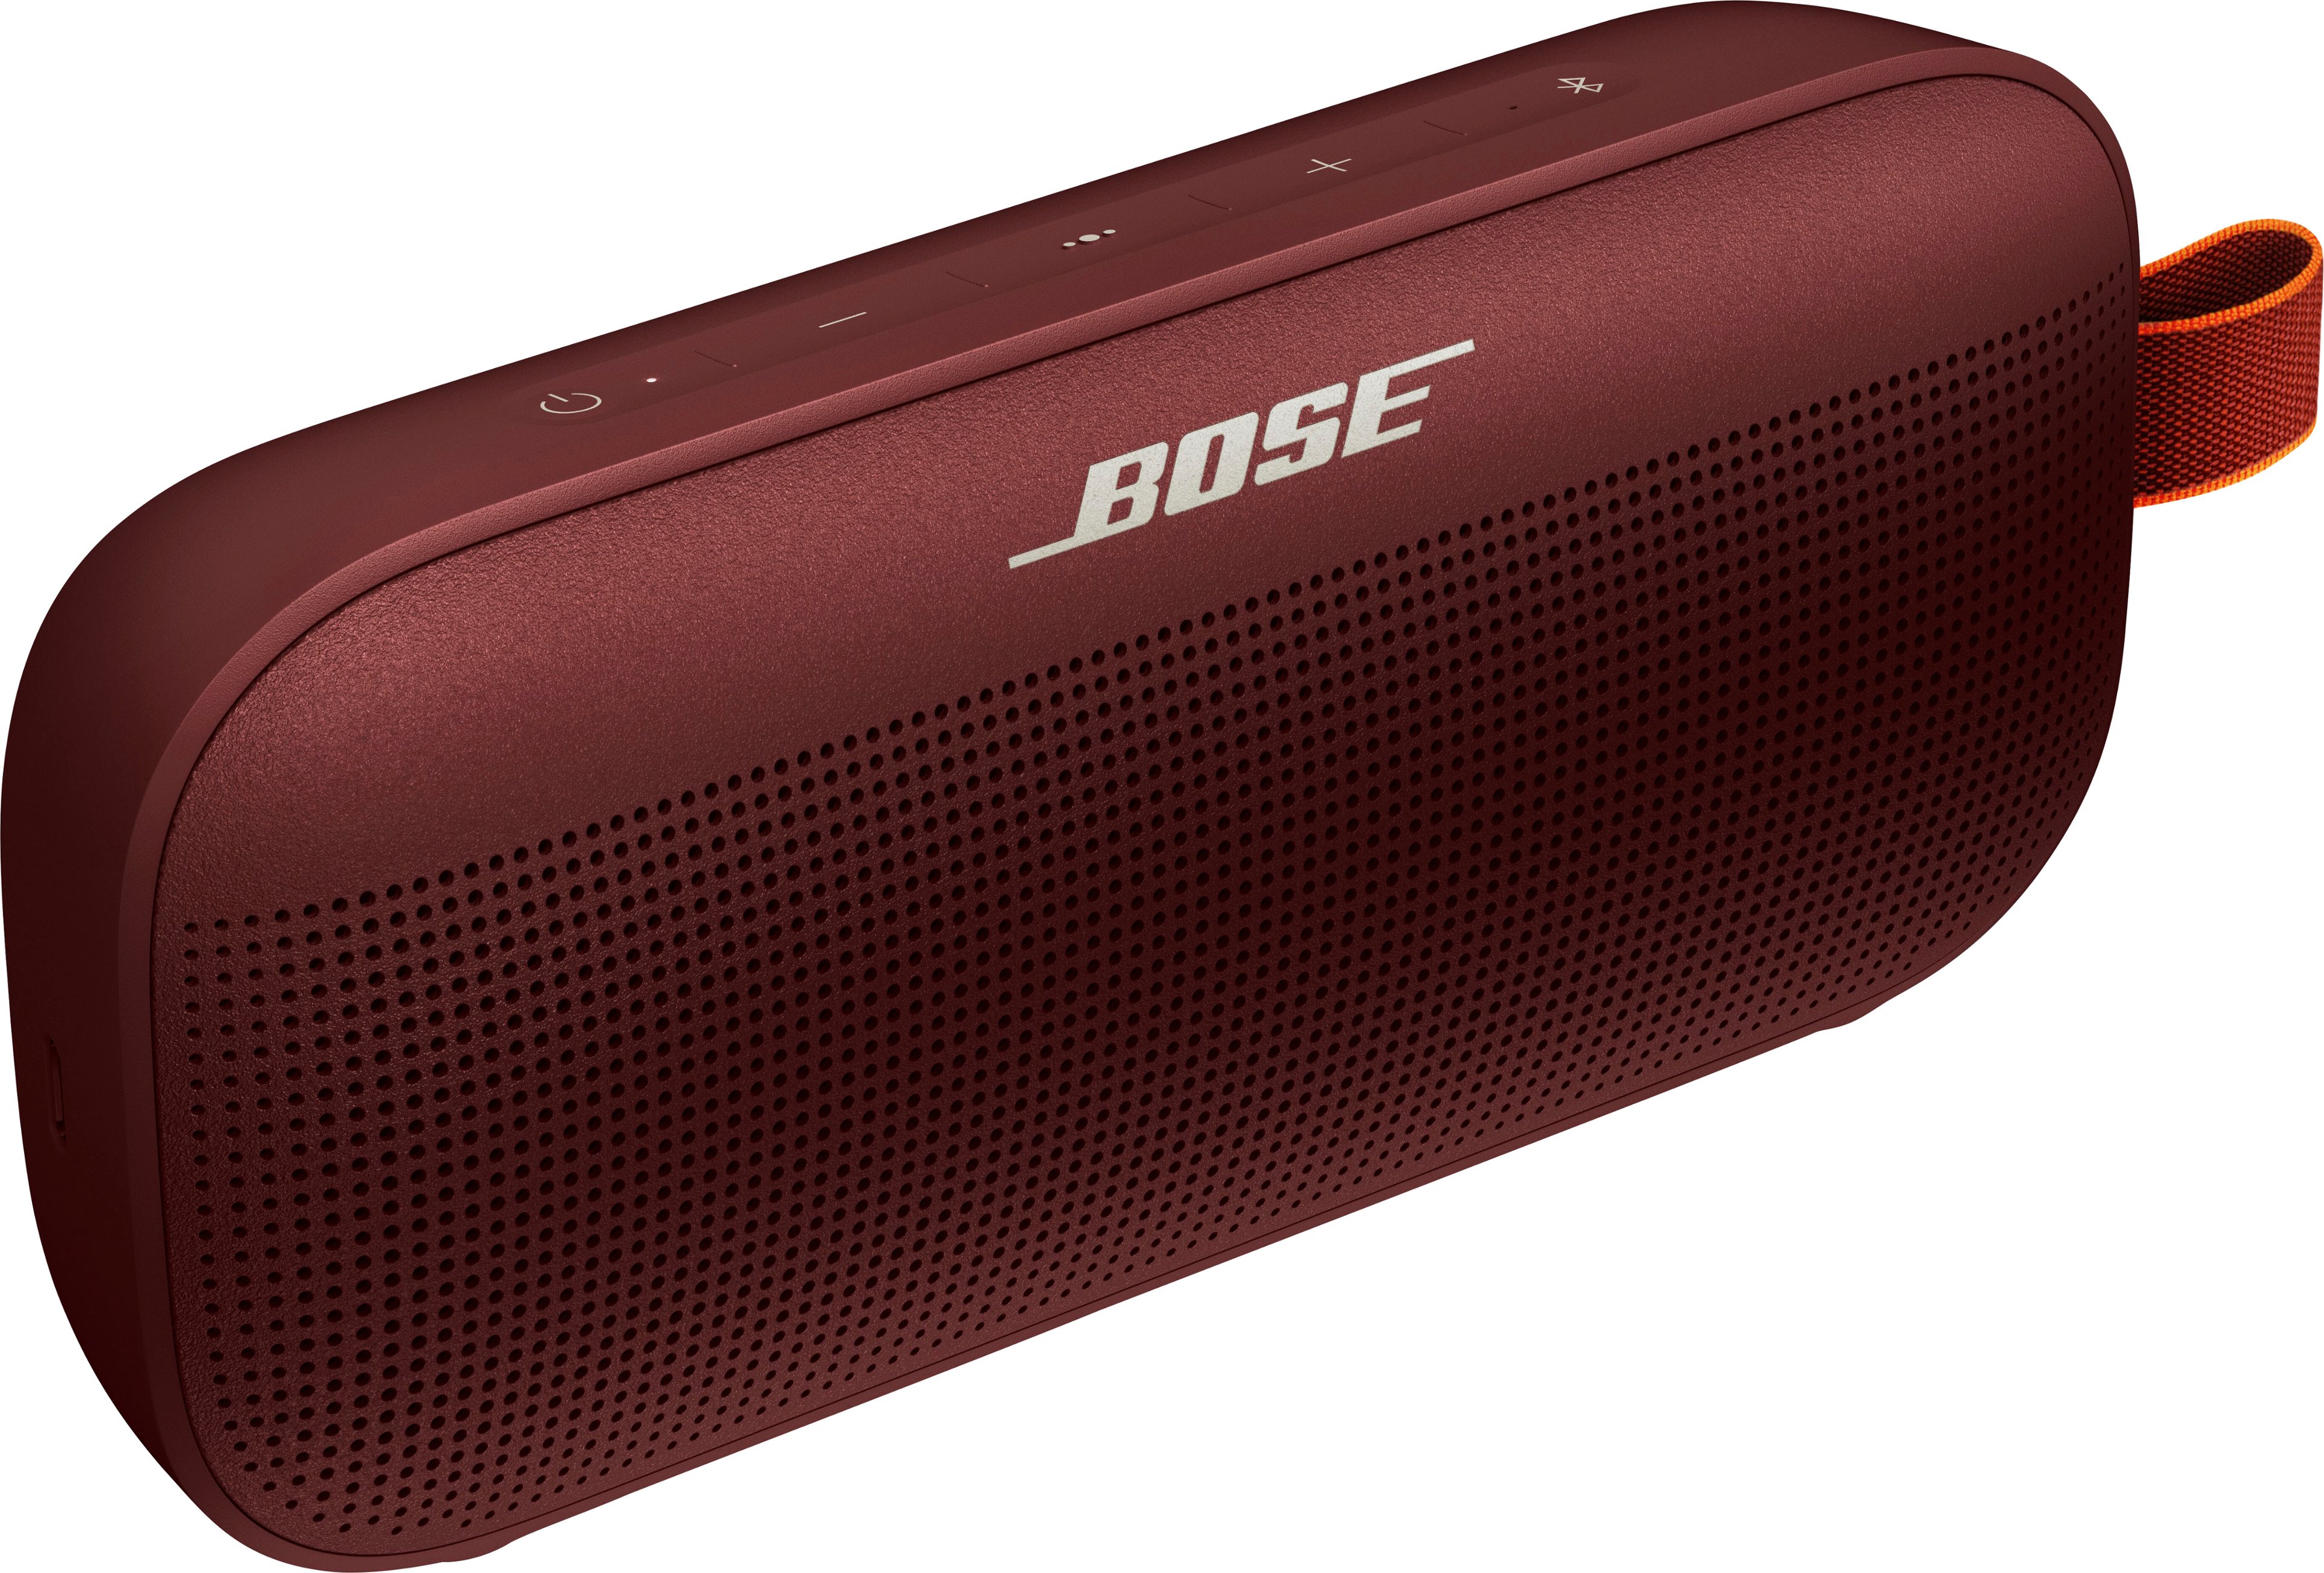  Bose SoundLink Flex Bluetooth Speaker, Portable Speaker with  Microphone, Wireless Waterproof Speaker for Travel, Outdoor and Pool Use,  Carmine Red : Electronics